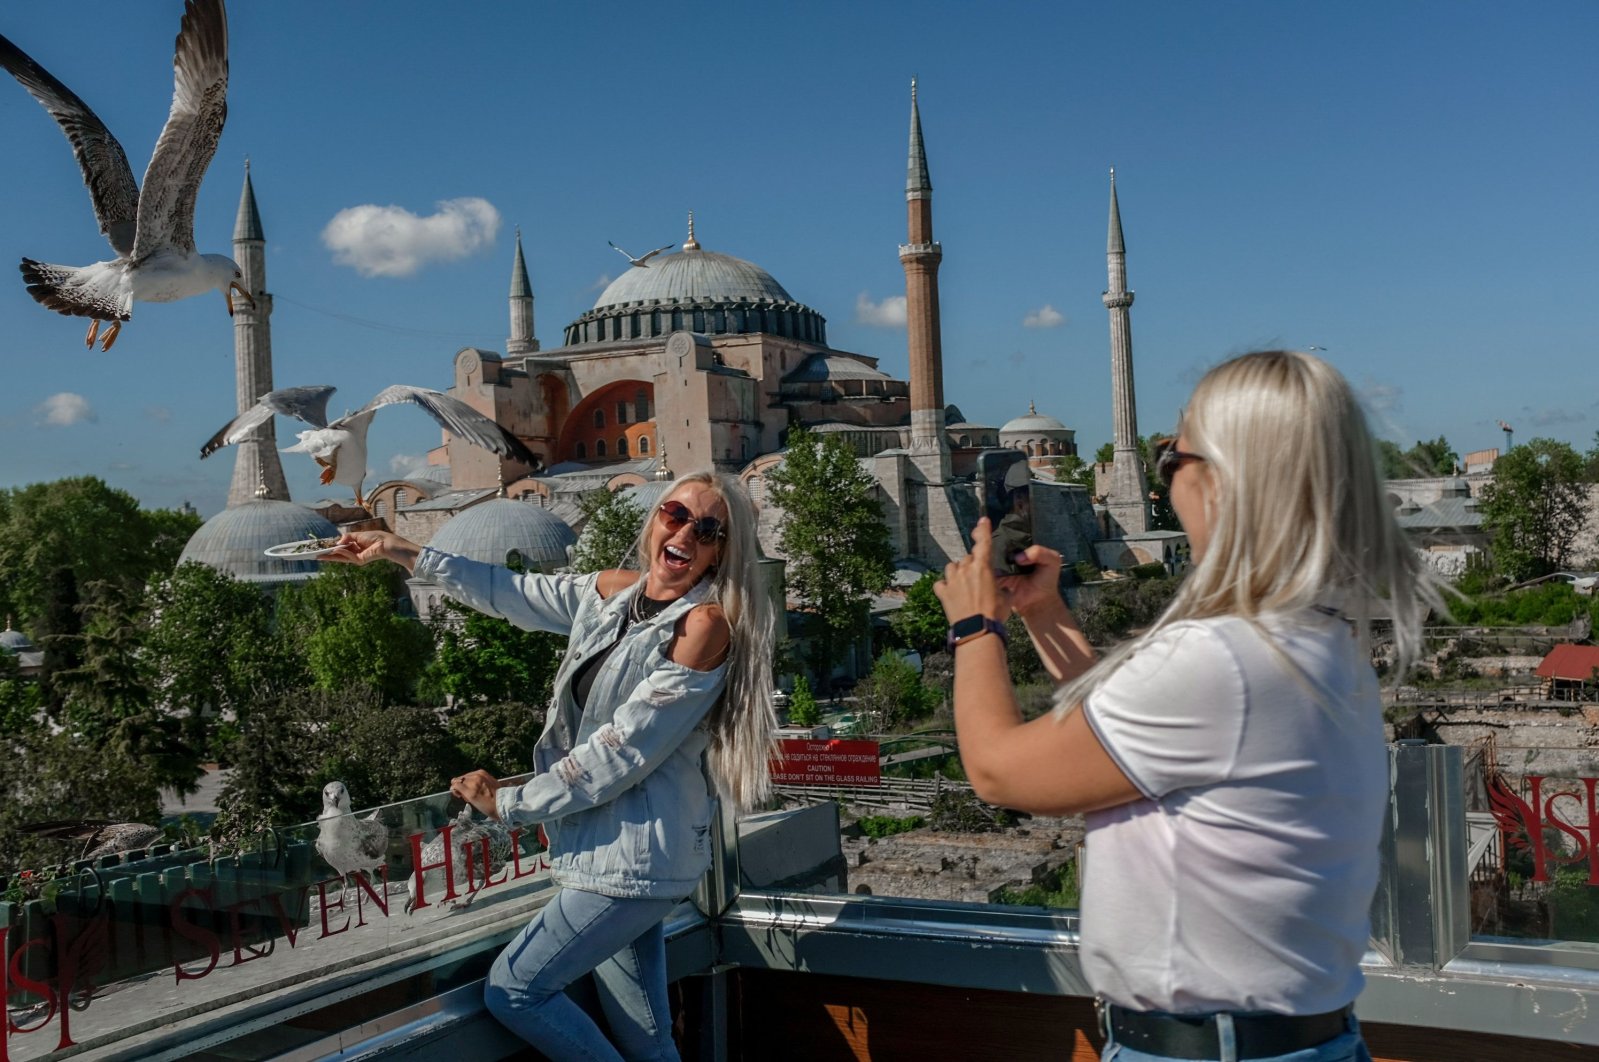 A tourist poses for a picture near the Hagia Sophia Grand Mosque in Sultanahmet, Istanbul, Türkiye, May 9, 2021. (AFP Photo)